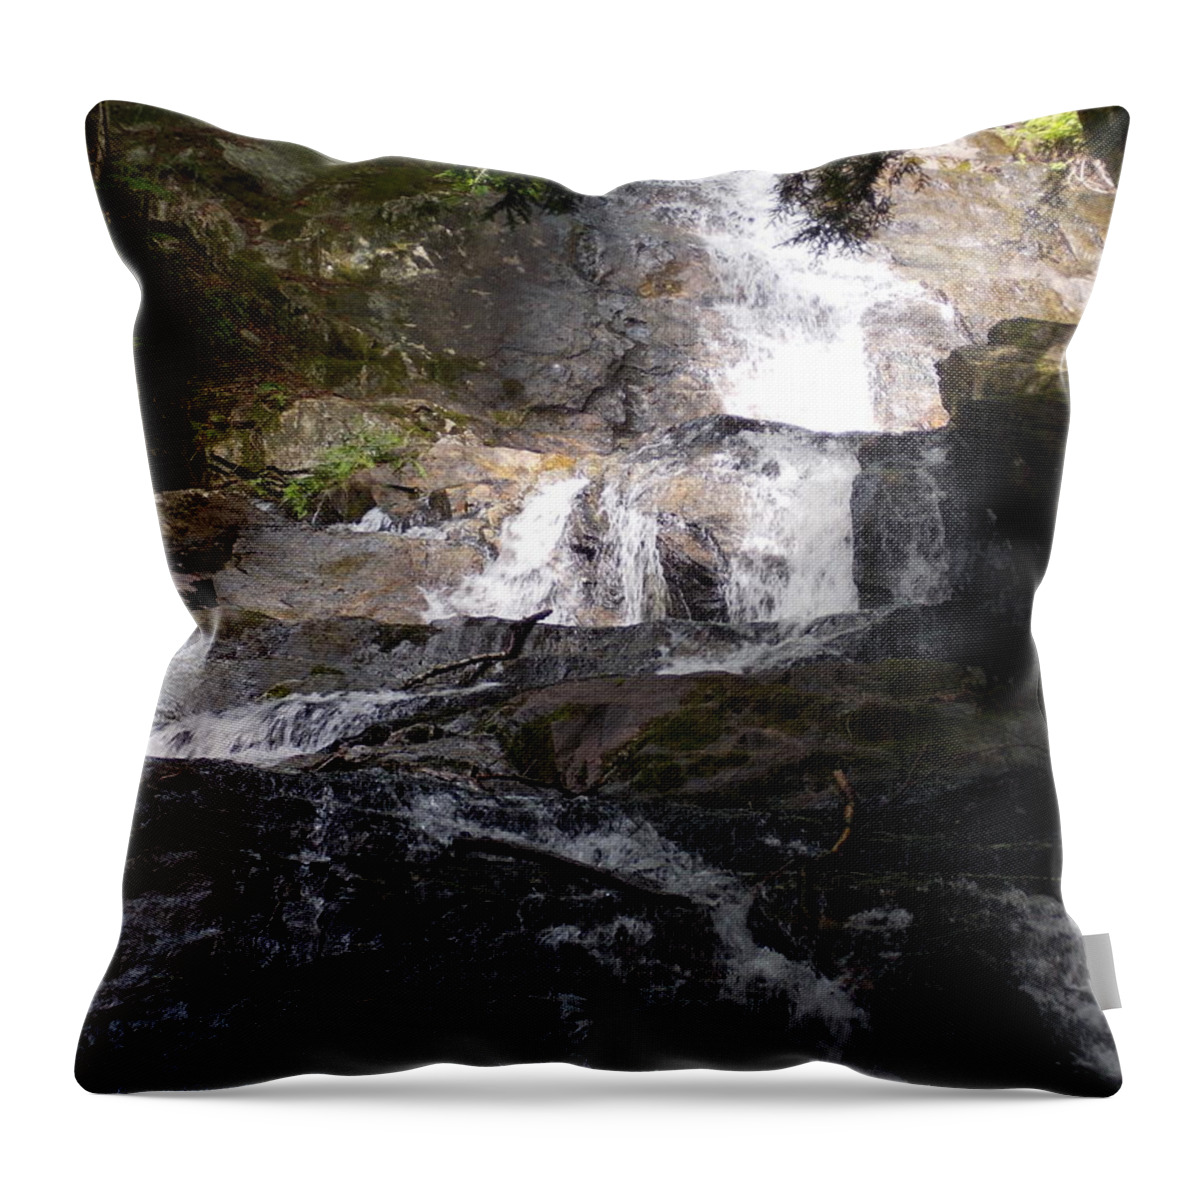 Waterfalls Throw Pillow featuring the photograph Vermont Waterfall by Catherine Gagne